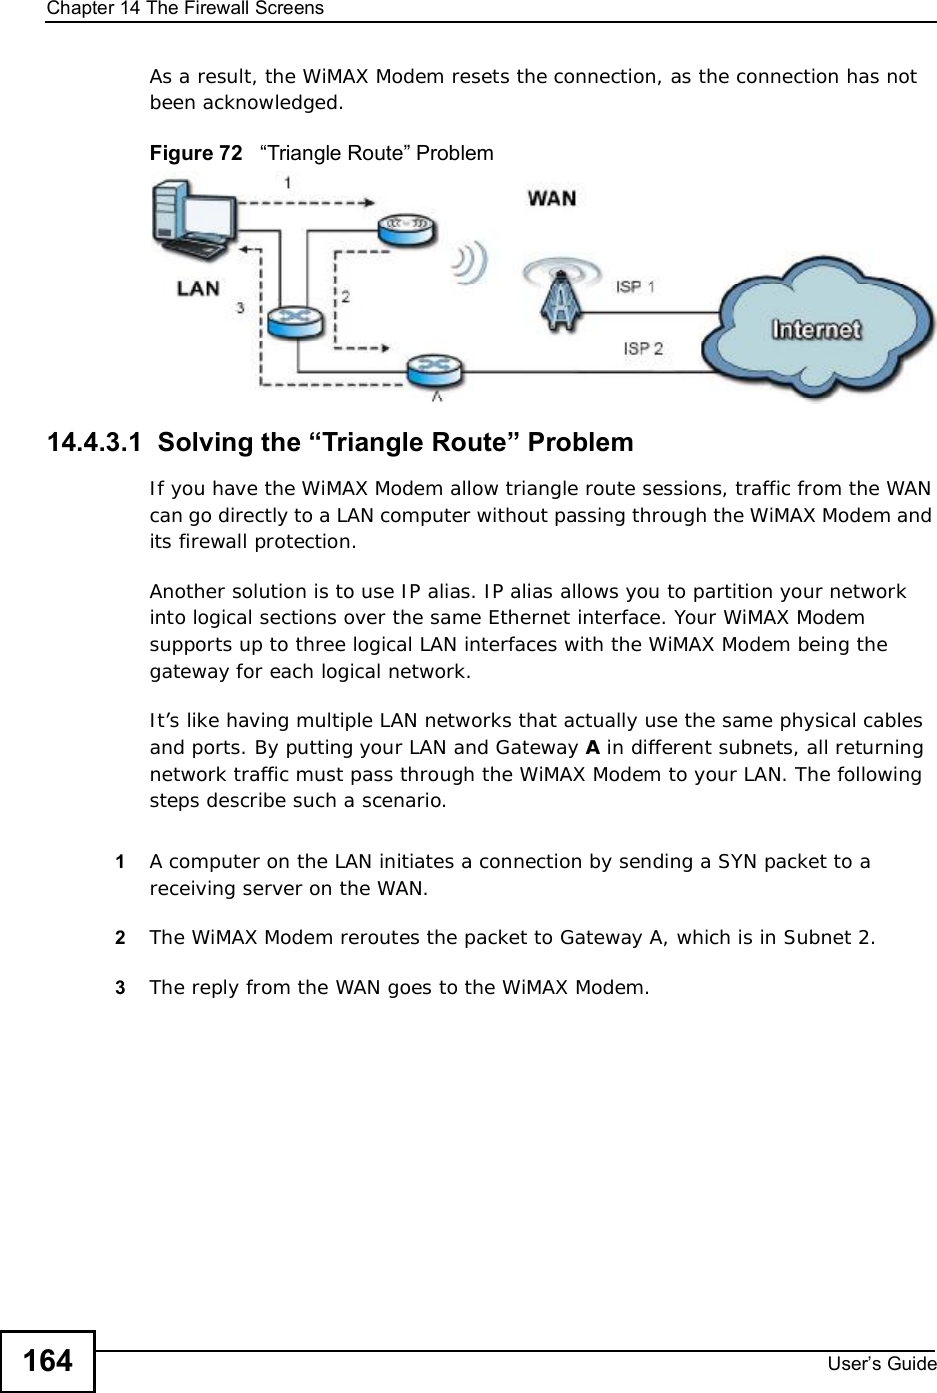 Chapter 14The Firewall ScreensUser s Guide164As a result, the WiMAX Modem resets the connection, as the connection has not been acknowledged.Figure 72   !Triangle Route&quot; Problem14.4.3.1  Solving the “Triangle Route” ProblemIf you have the WiMAX Modem allow triangle route sessions, traffic from the WAN can go directly to a LAN computer without passing through the WiMAX Modem and its firewall protection. Another solution is to use IP alias. IP alias allows you to partition your network into logical sections over the same Ethernet interface. Your WiMAX Modem supports up to three logical LAN interfaces with the WiMAX Modem being the gateway for each logical network. It’s like having multiple LAN networks that actually use the same physical cables and ports. By putting your LAN and Gateway A in different subnets, all returning network traffic must pass through the WiMAX Modem to your LAN. The following steps describe such a scenario.1A computer on the LAN initiates a connection by sending a SYN packet to a receiving server on the WAN. 2The WiMAX Modemreroutes the packet to Gateway A, which is in Subnet 2. 3The reply from the WAN goes to the WiMAX Modem. 